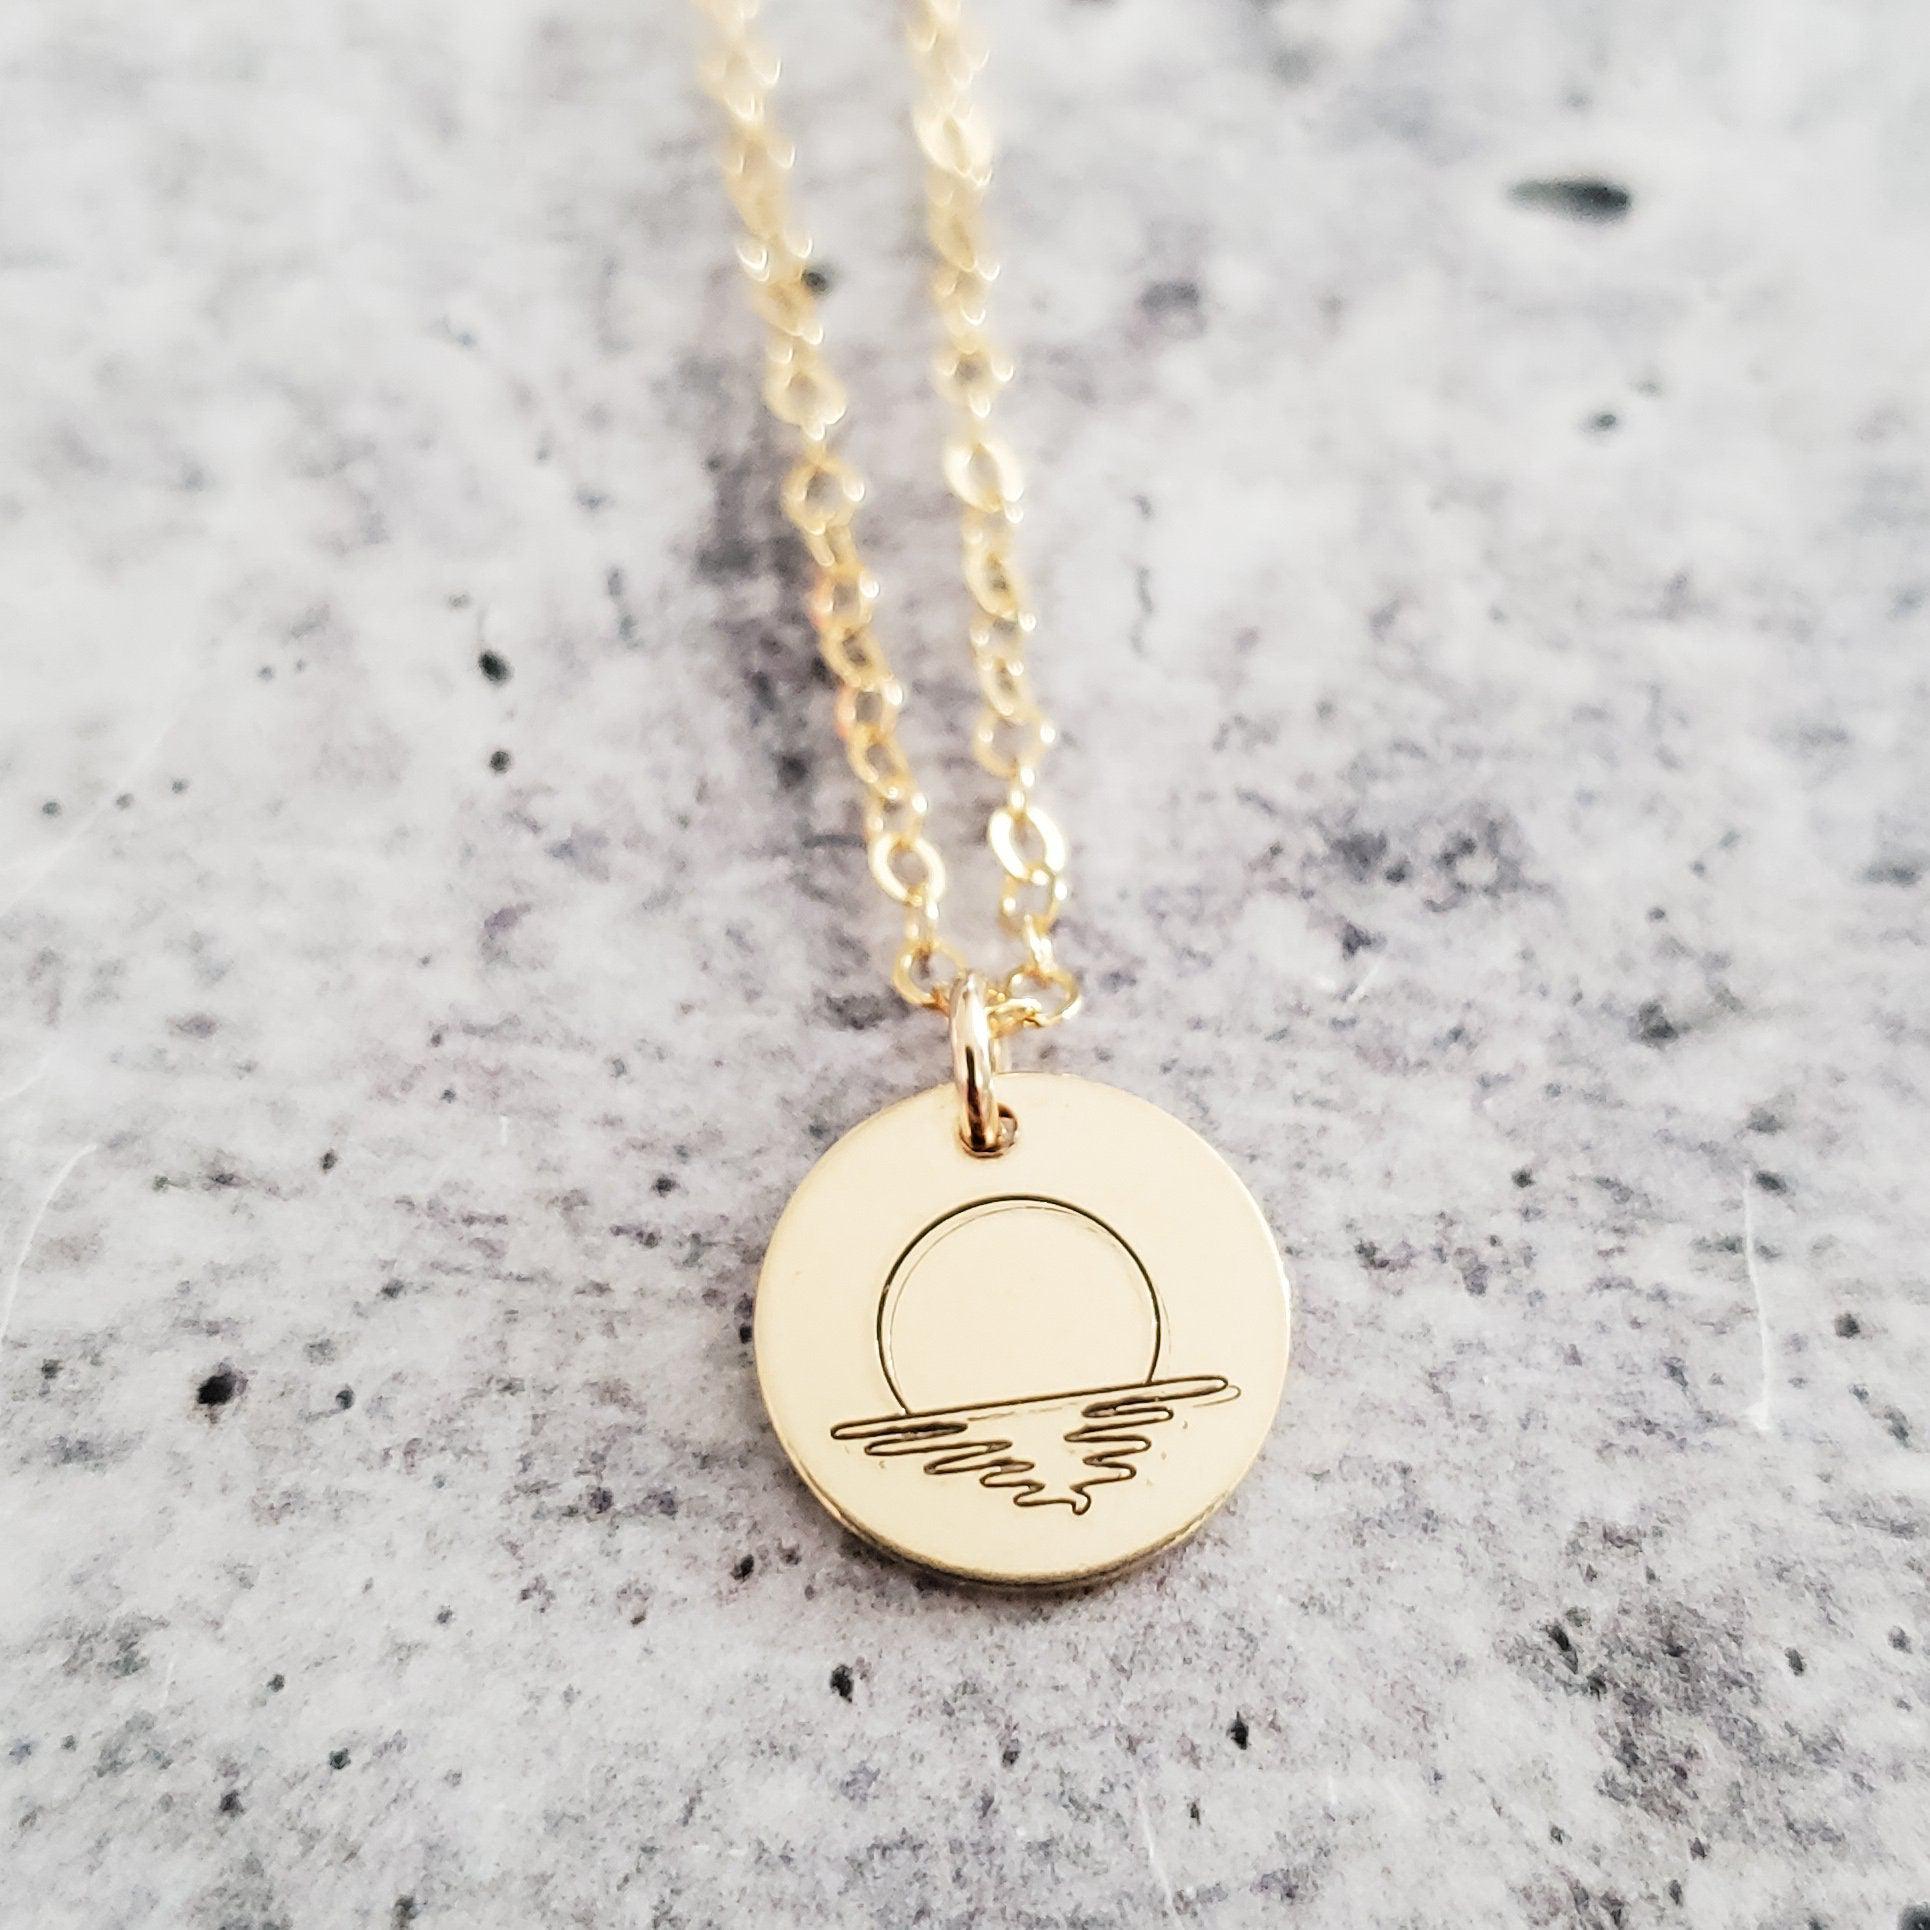 Gold Ocean Sunset Necklace - Minimalist Silver Boho Beach Charm Necklace - Initial Necklace for Beach Baby - Rose Gold Teen Dainty Necklace